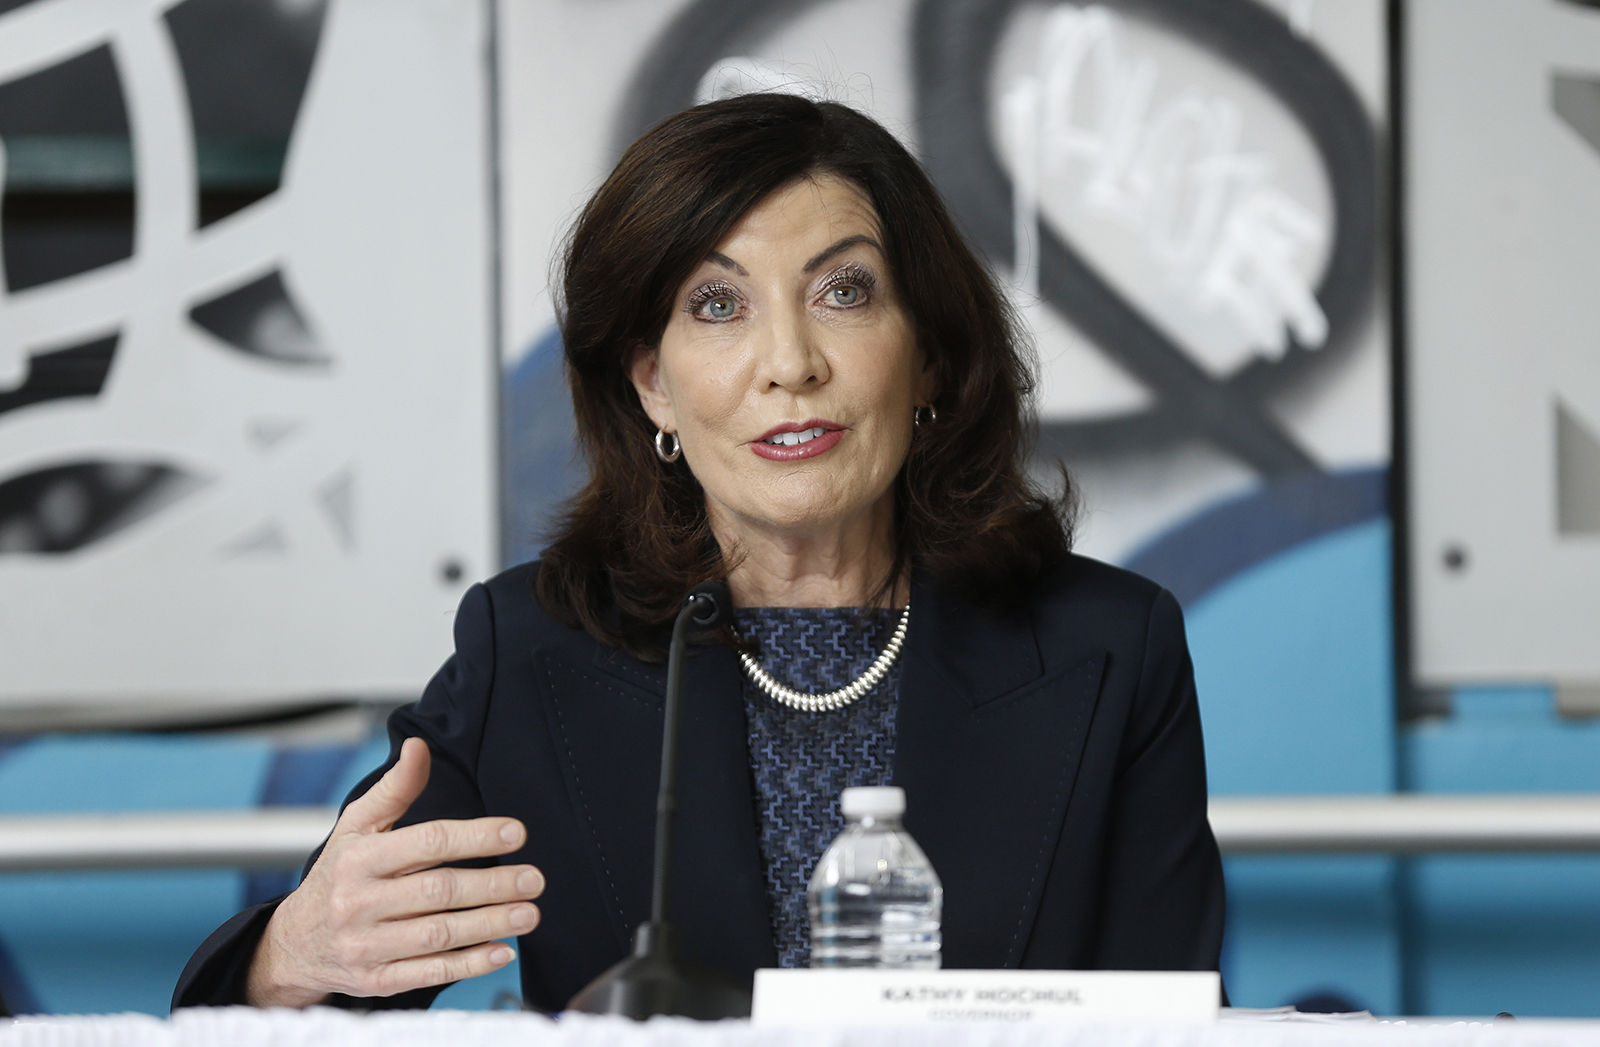 NY State Governor Kathy Hochul on March 10 in New York City.